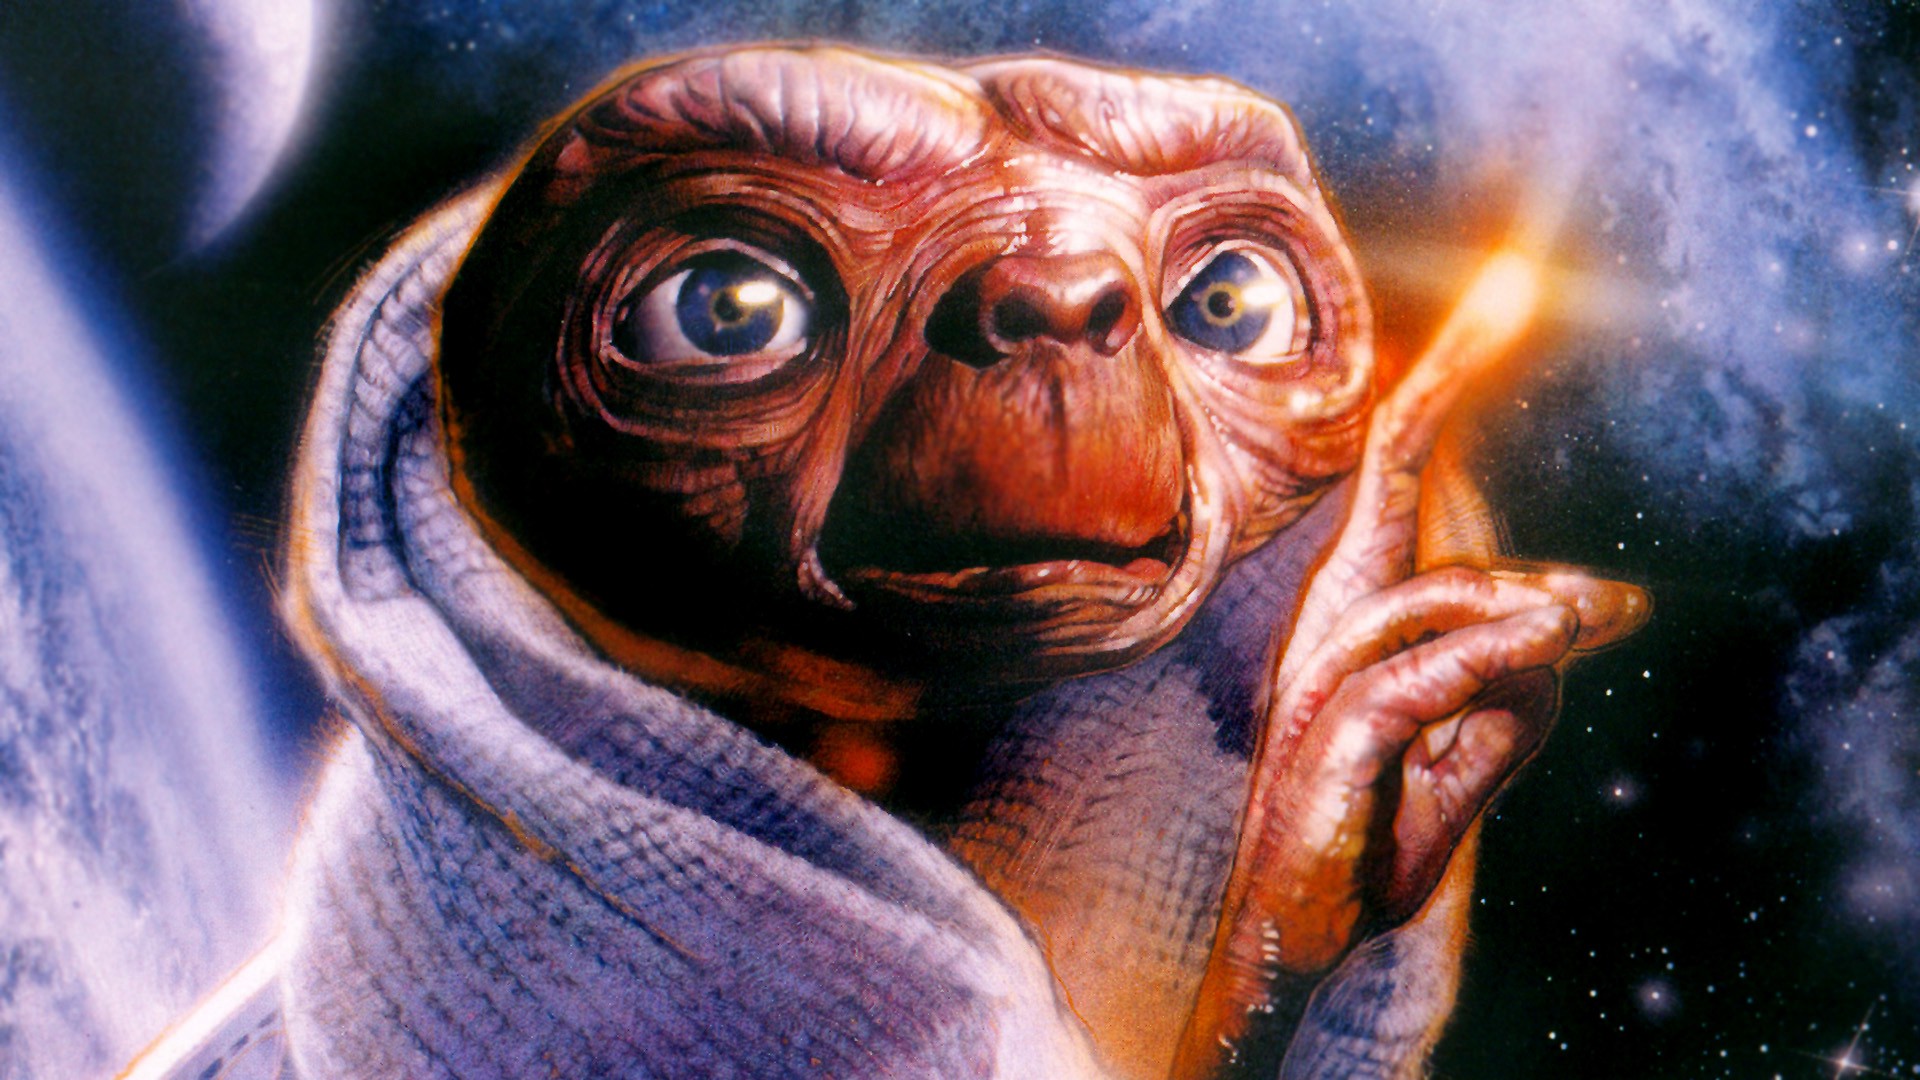 General 1920x1080 E.T. index finger raised Earth planet galaxy stars space finger pointing creature movies aliens Steven Spielberg